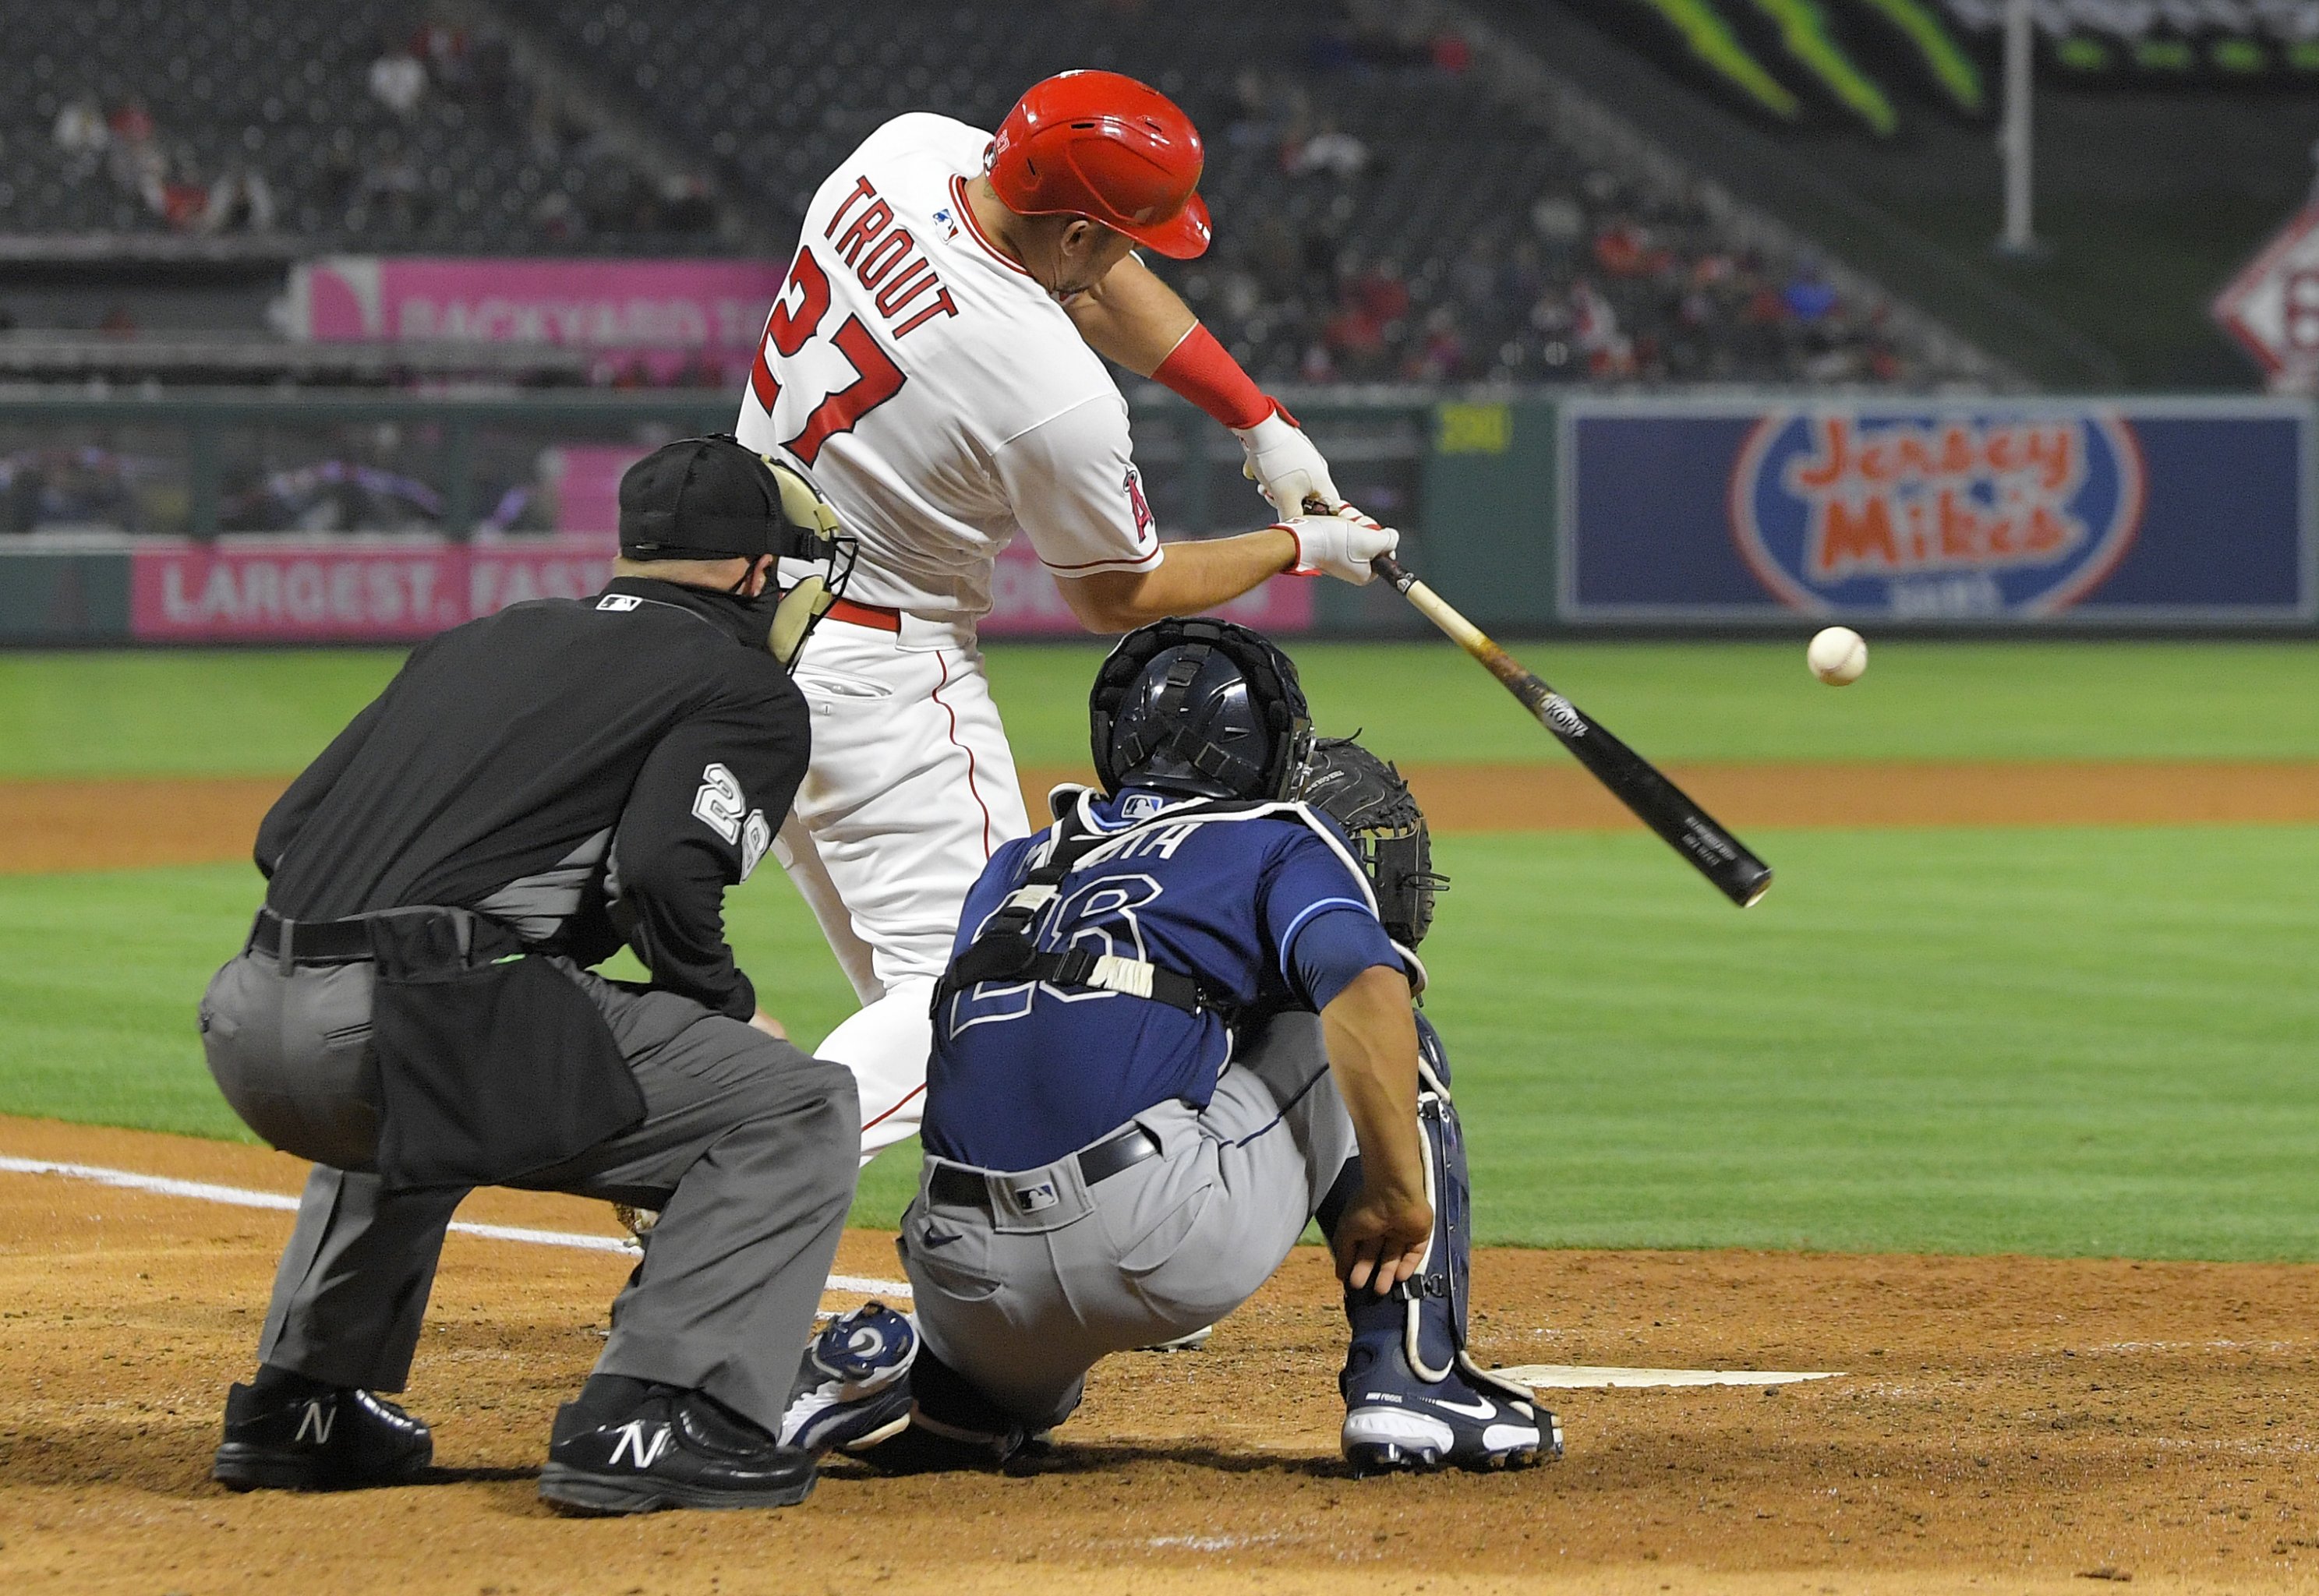 MLB video: What is the longest home run Mike Trout has hit in